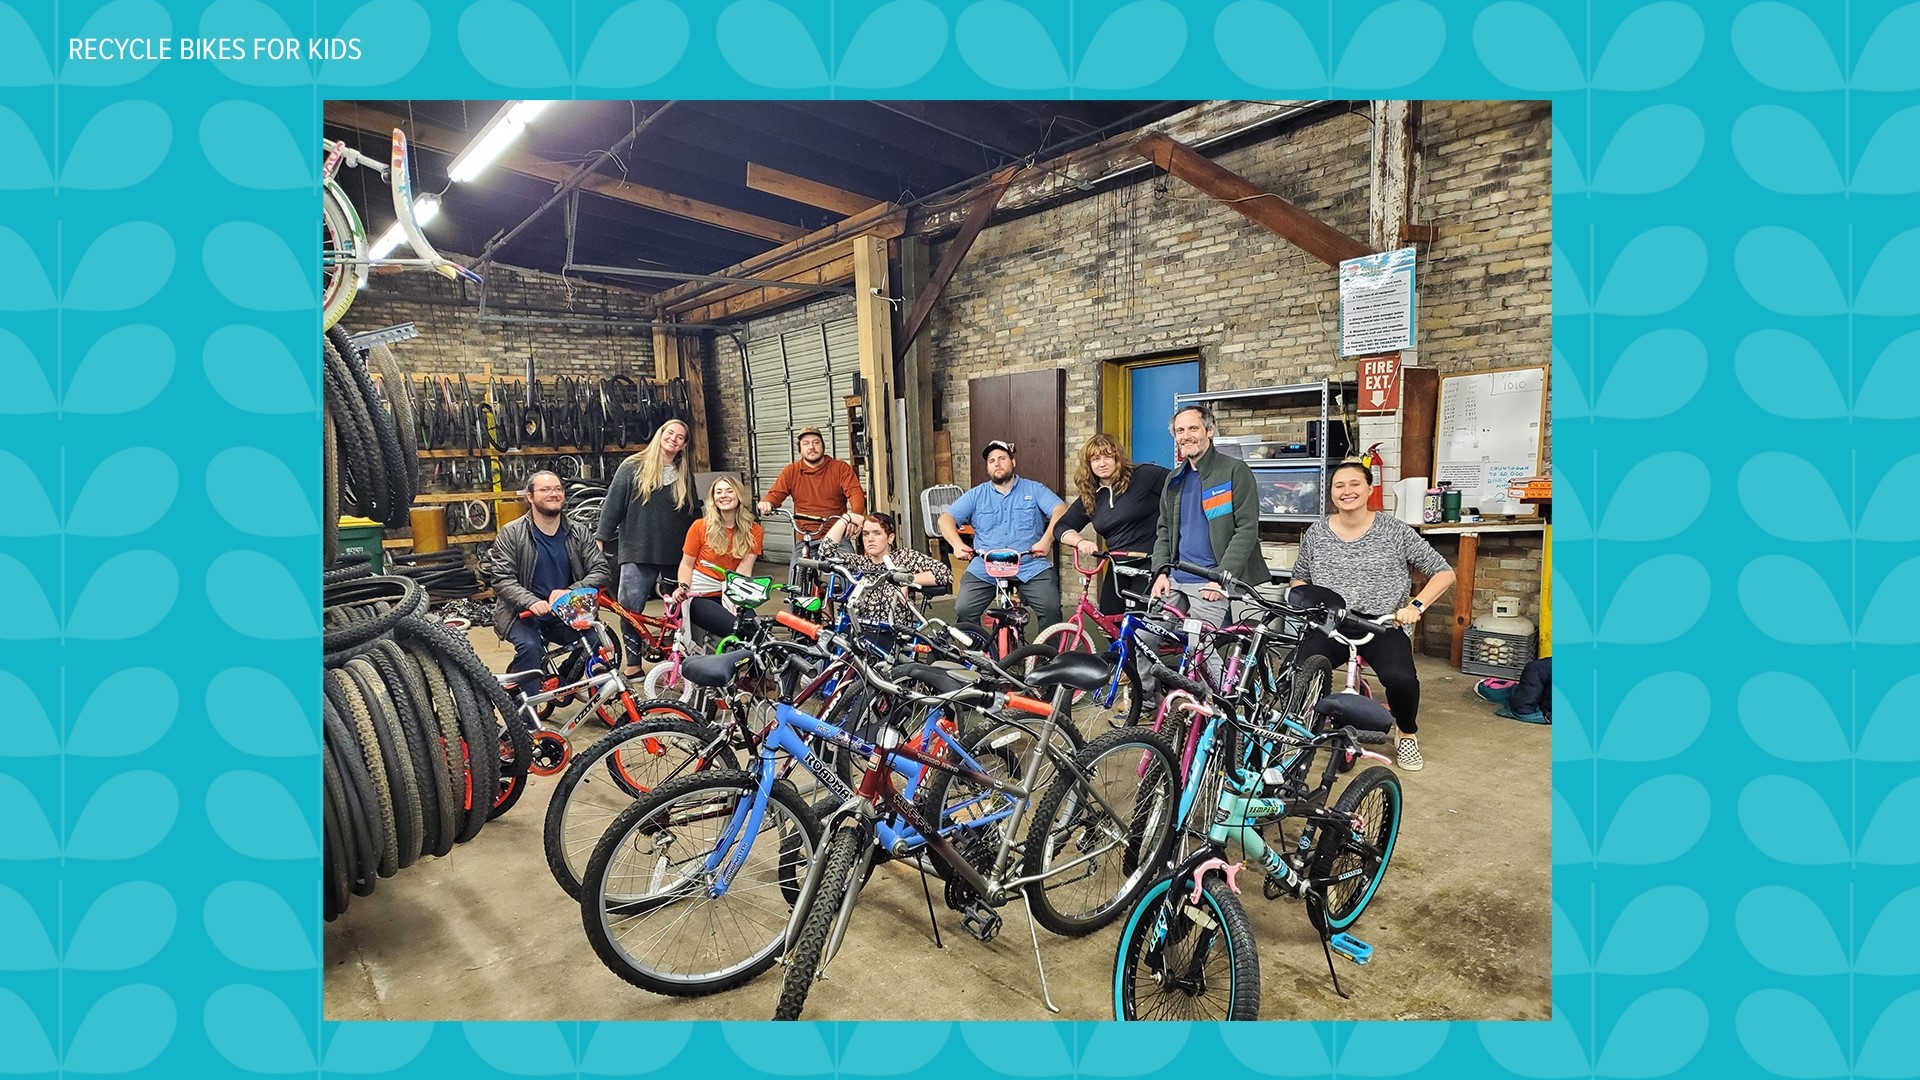 Program Manager, Meg Gholson explain ways the community can help recycle bicycles for local kids. She also discusses the upcoming event happening on May 5th.